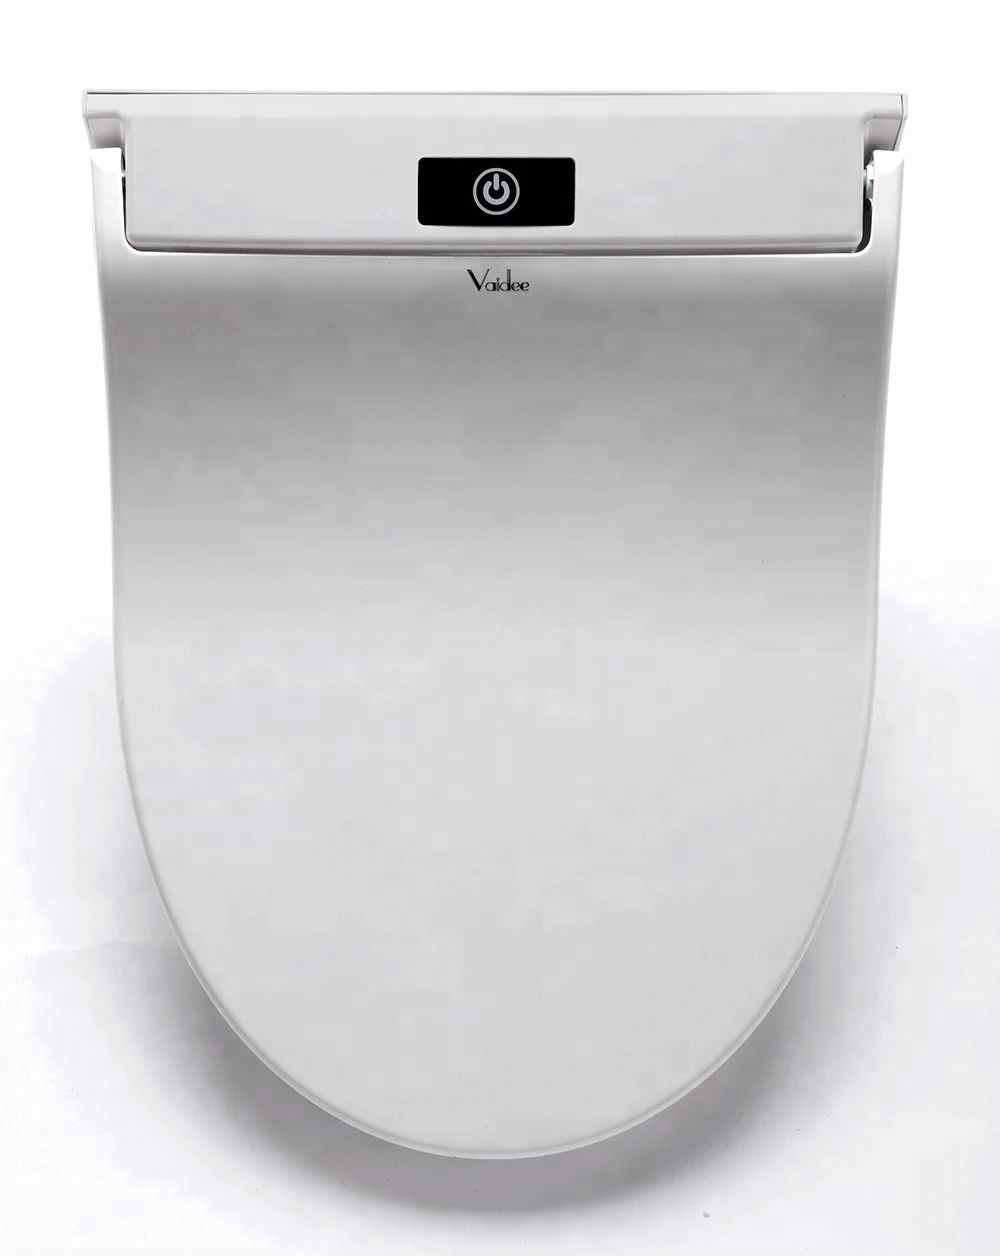 electric replaced toilet seat cover hygenic film plastic sanitary toilet seat